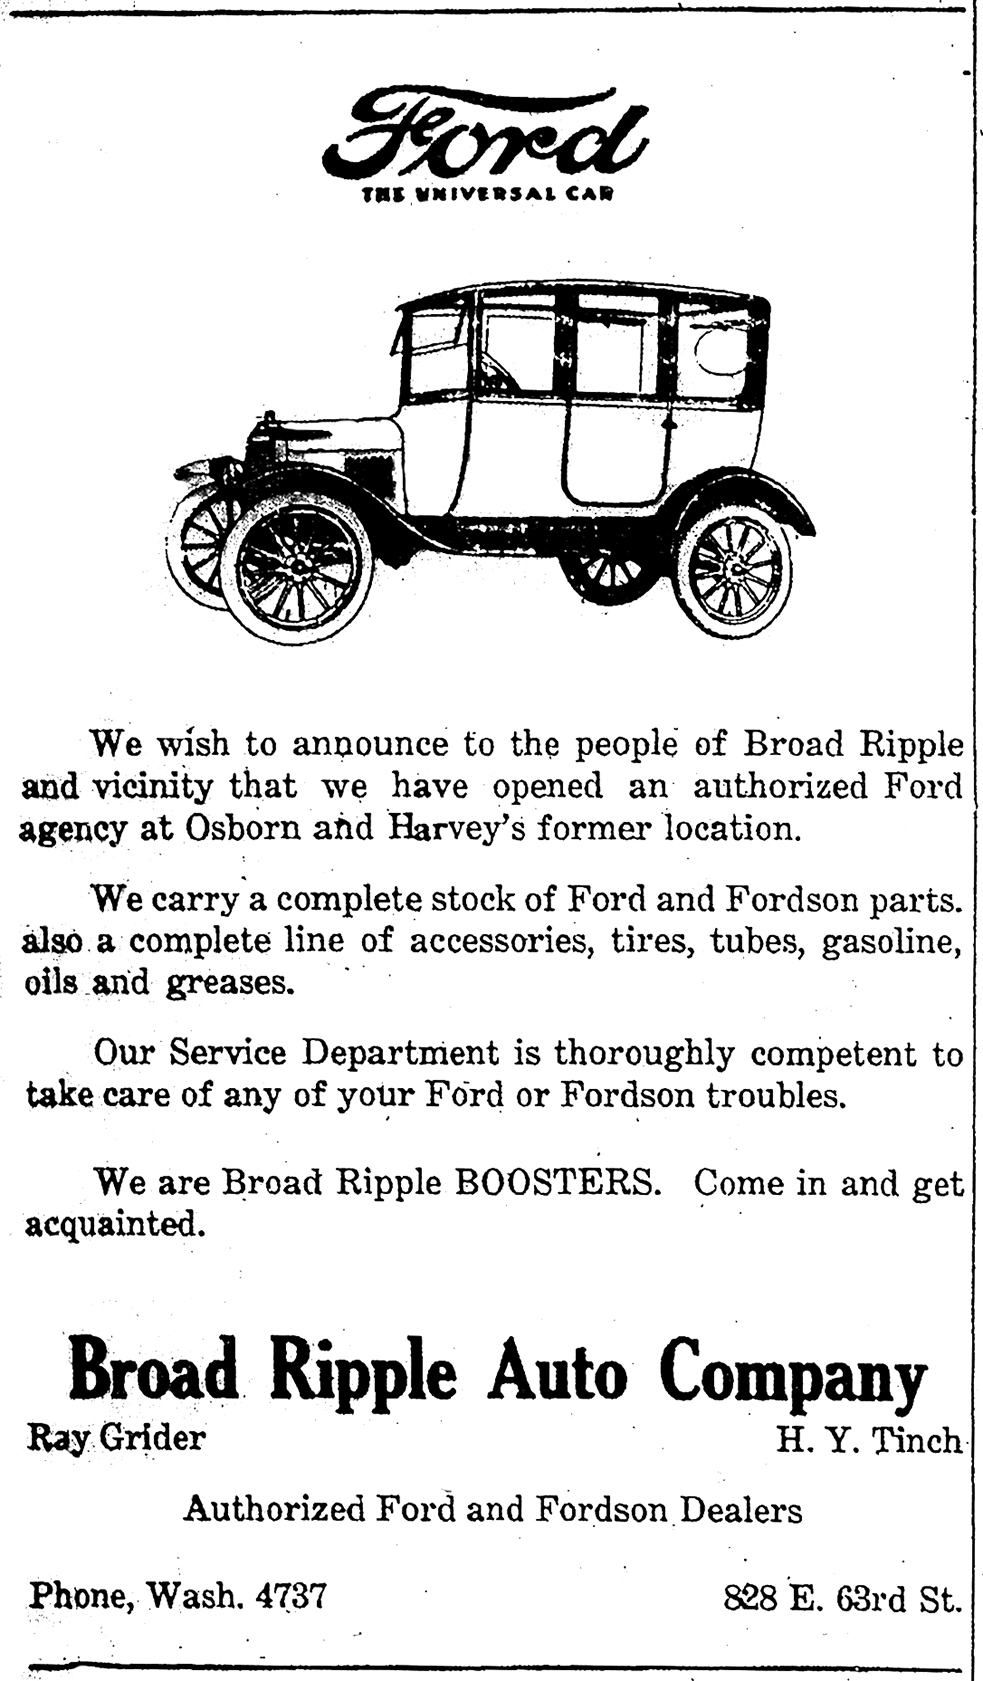 1913 ad for Broad Ripple Auto